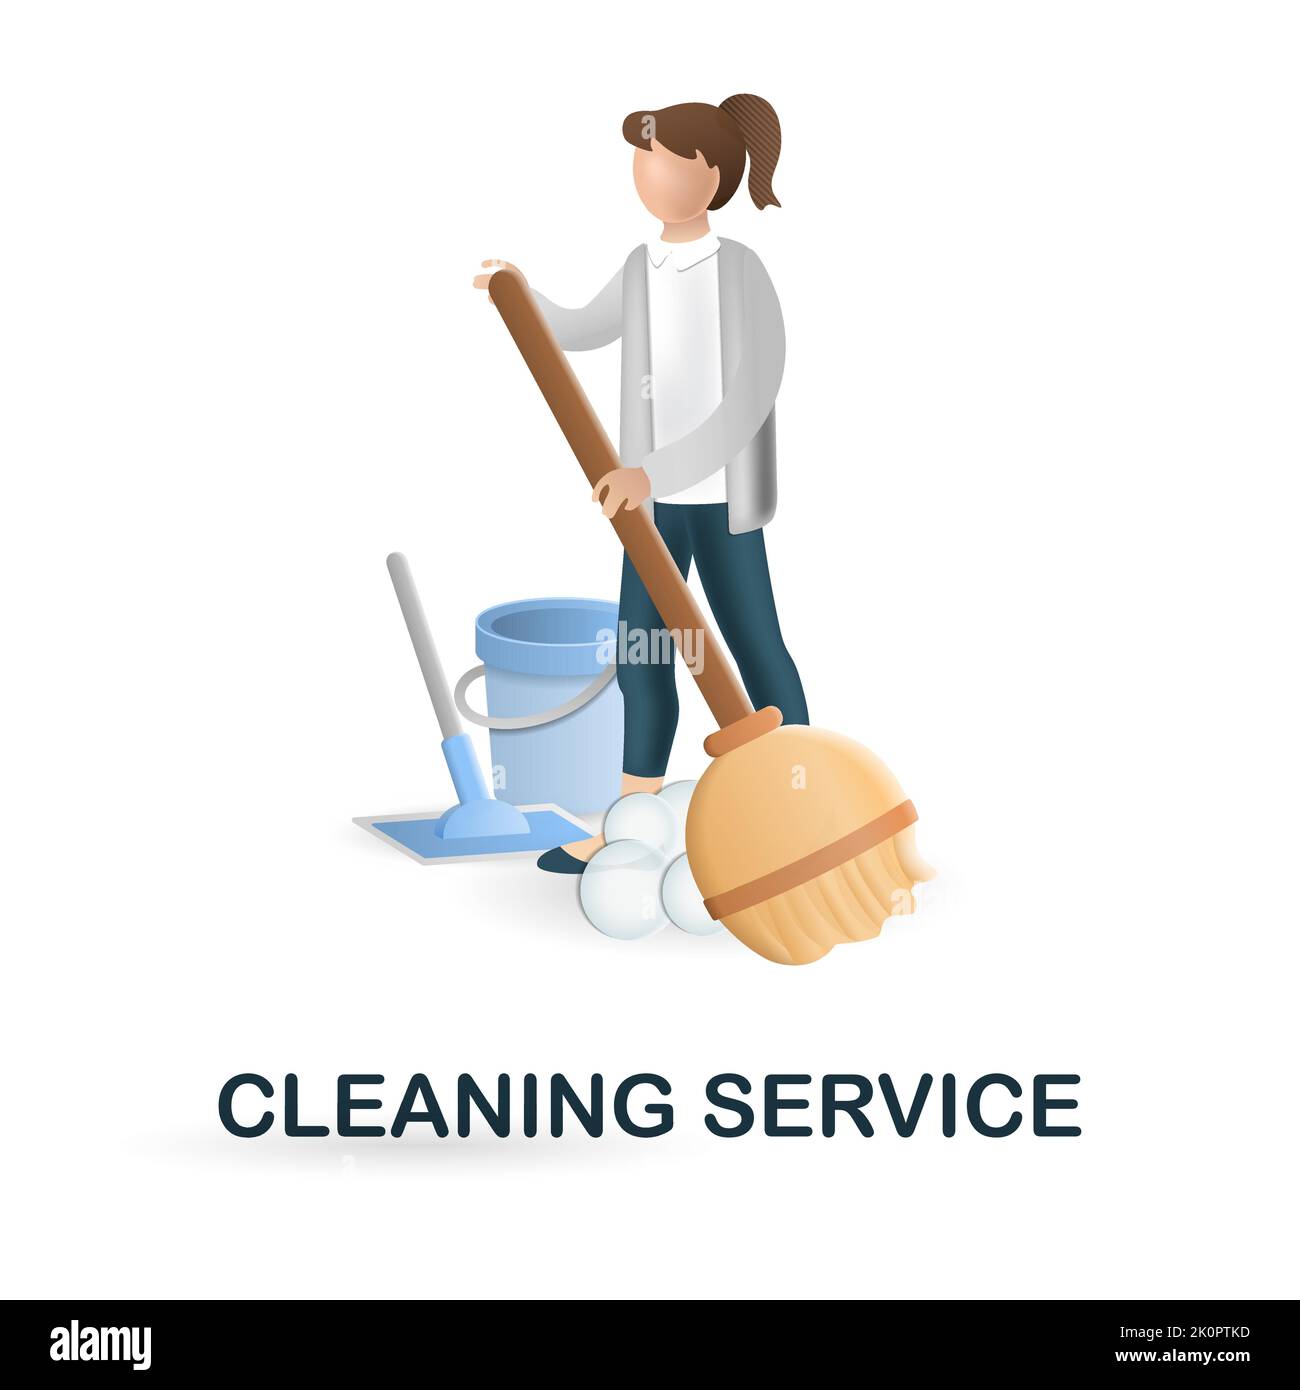 https://c8.alamy.com/comp/2K0PTKD/cleaning-service-icon-3d-illustration-from-cleaning-collection-creative-cleaning-service-3d-icon-for-web-design-templates-infographics-and-more-2K0PTKD.jpg